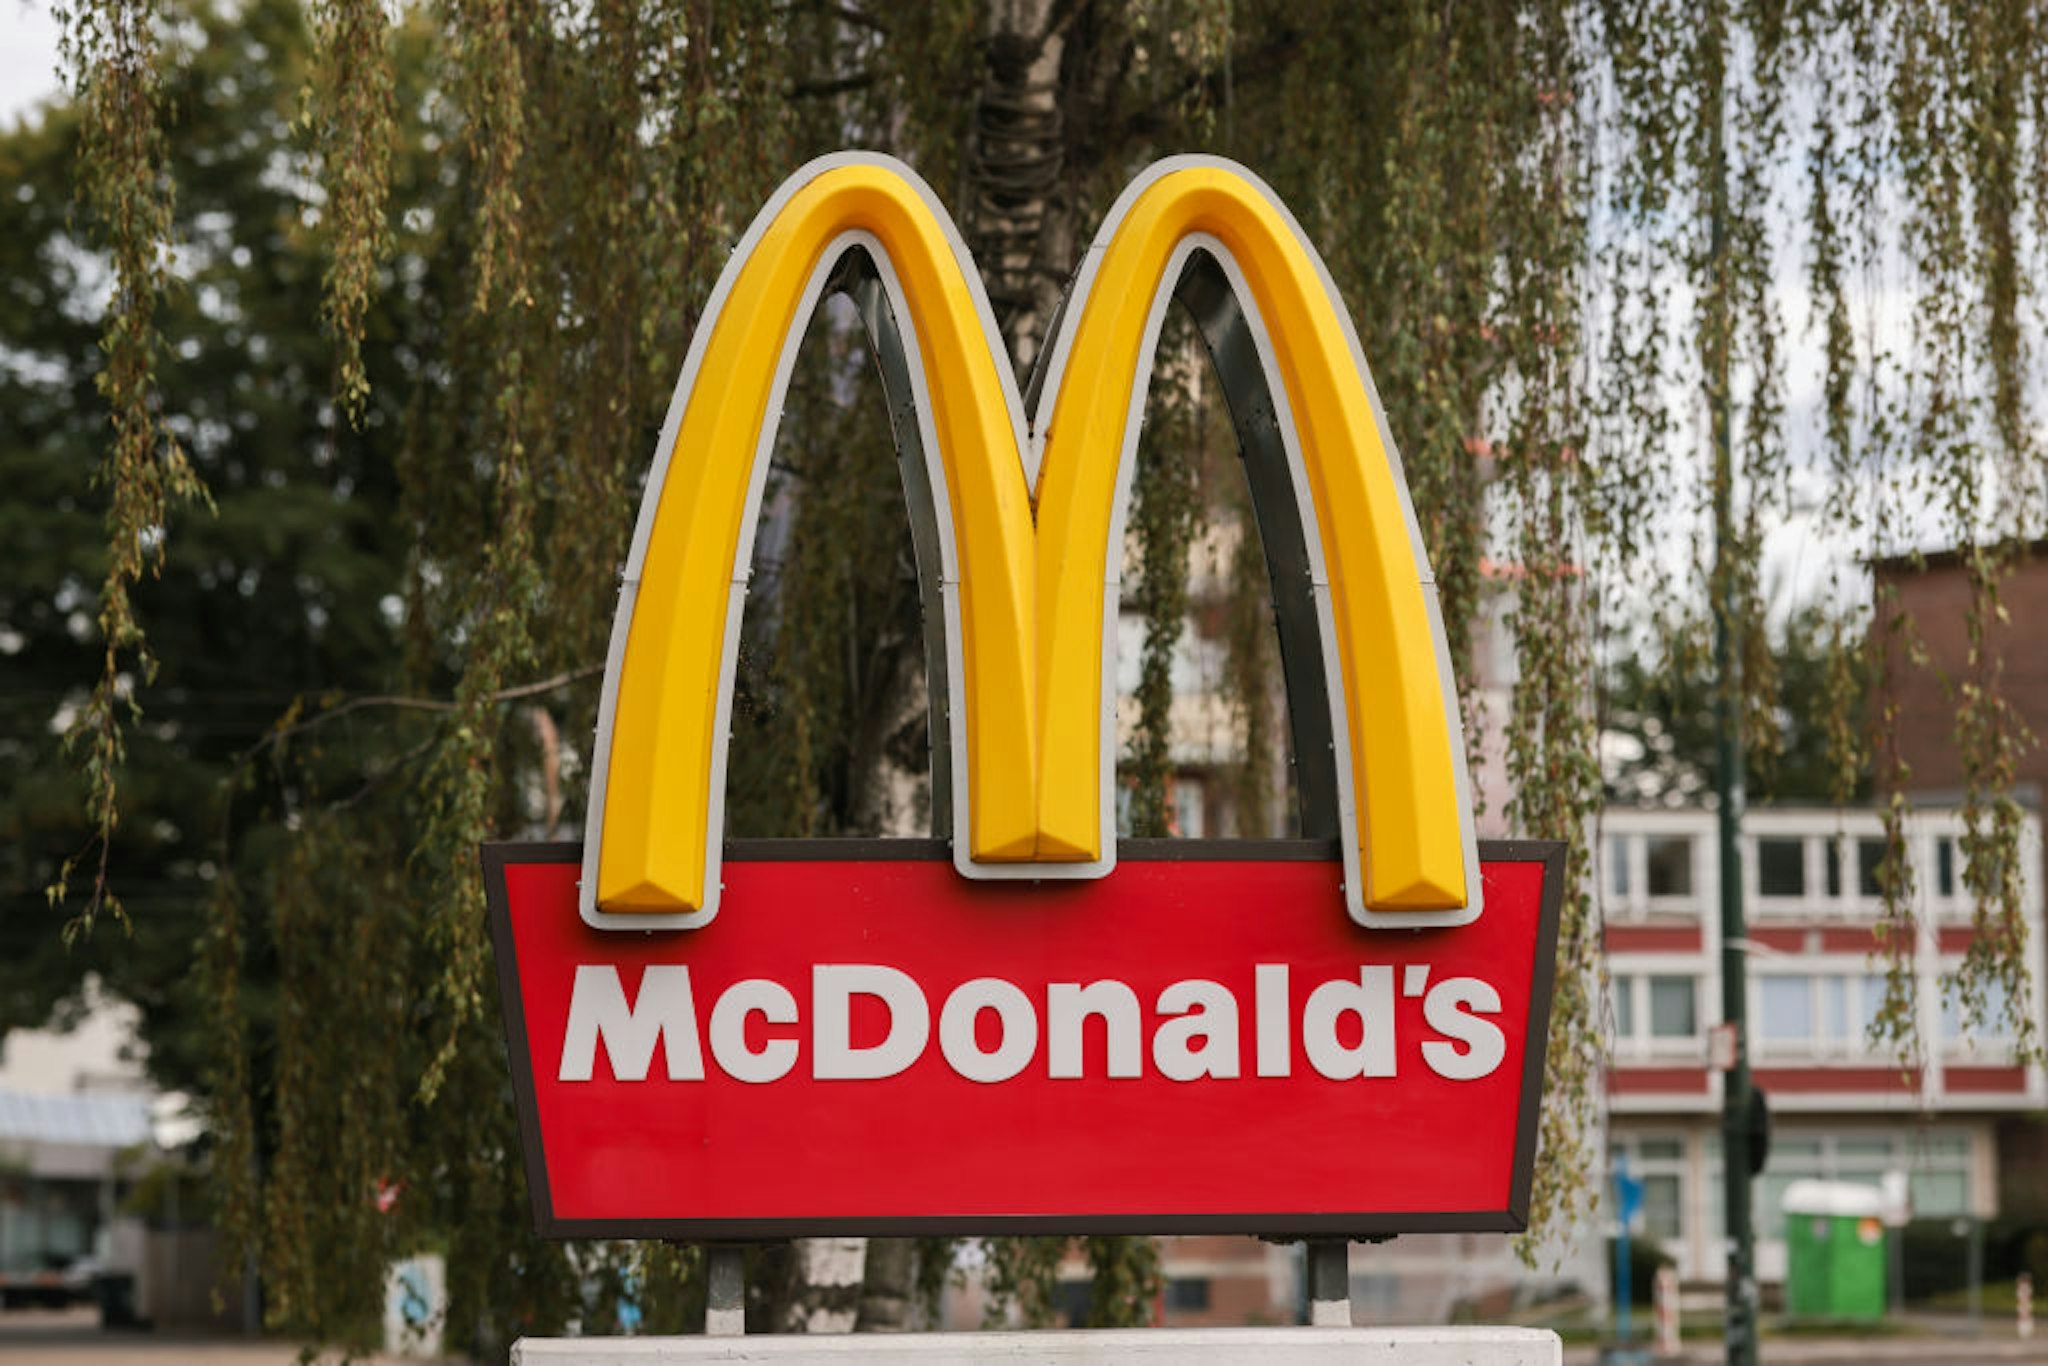 McDonalds logo photographed on August 07, 2021 in Dusseldorf, Germany.